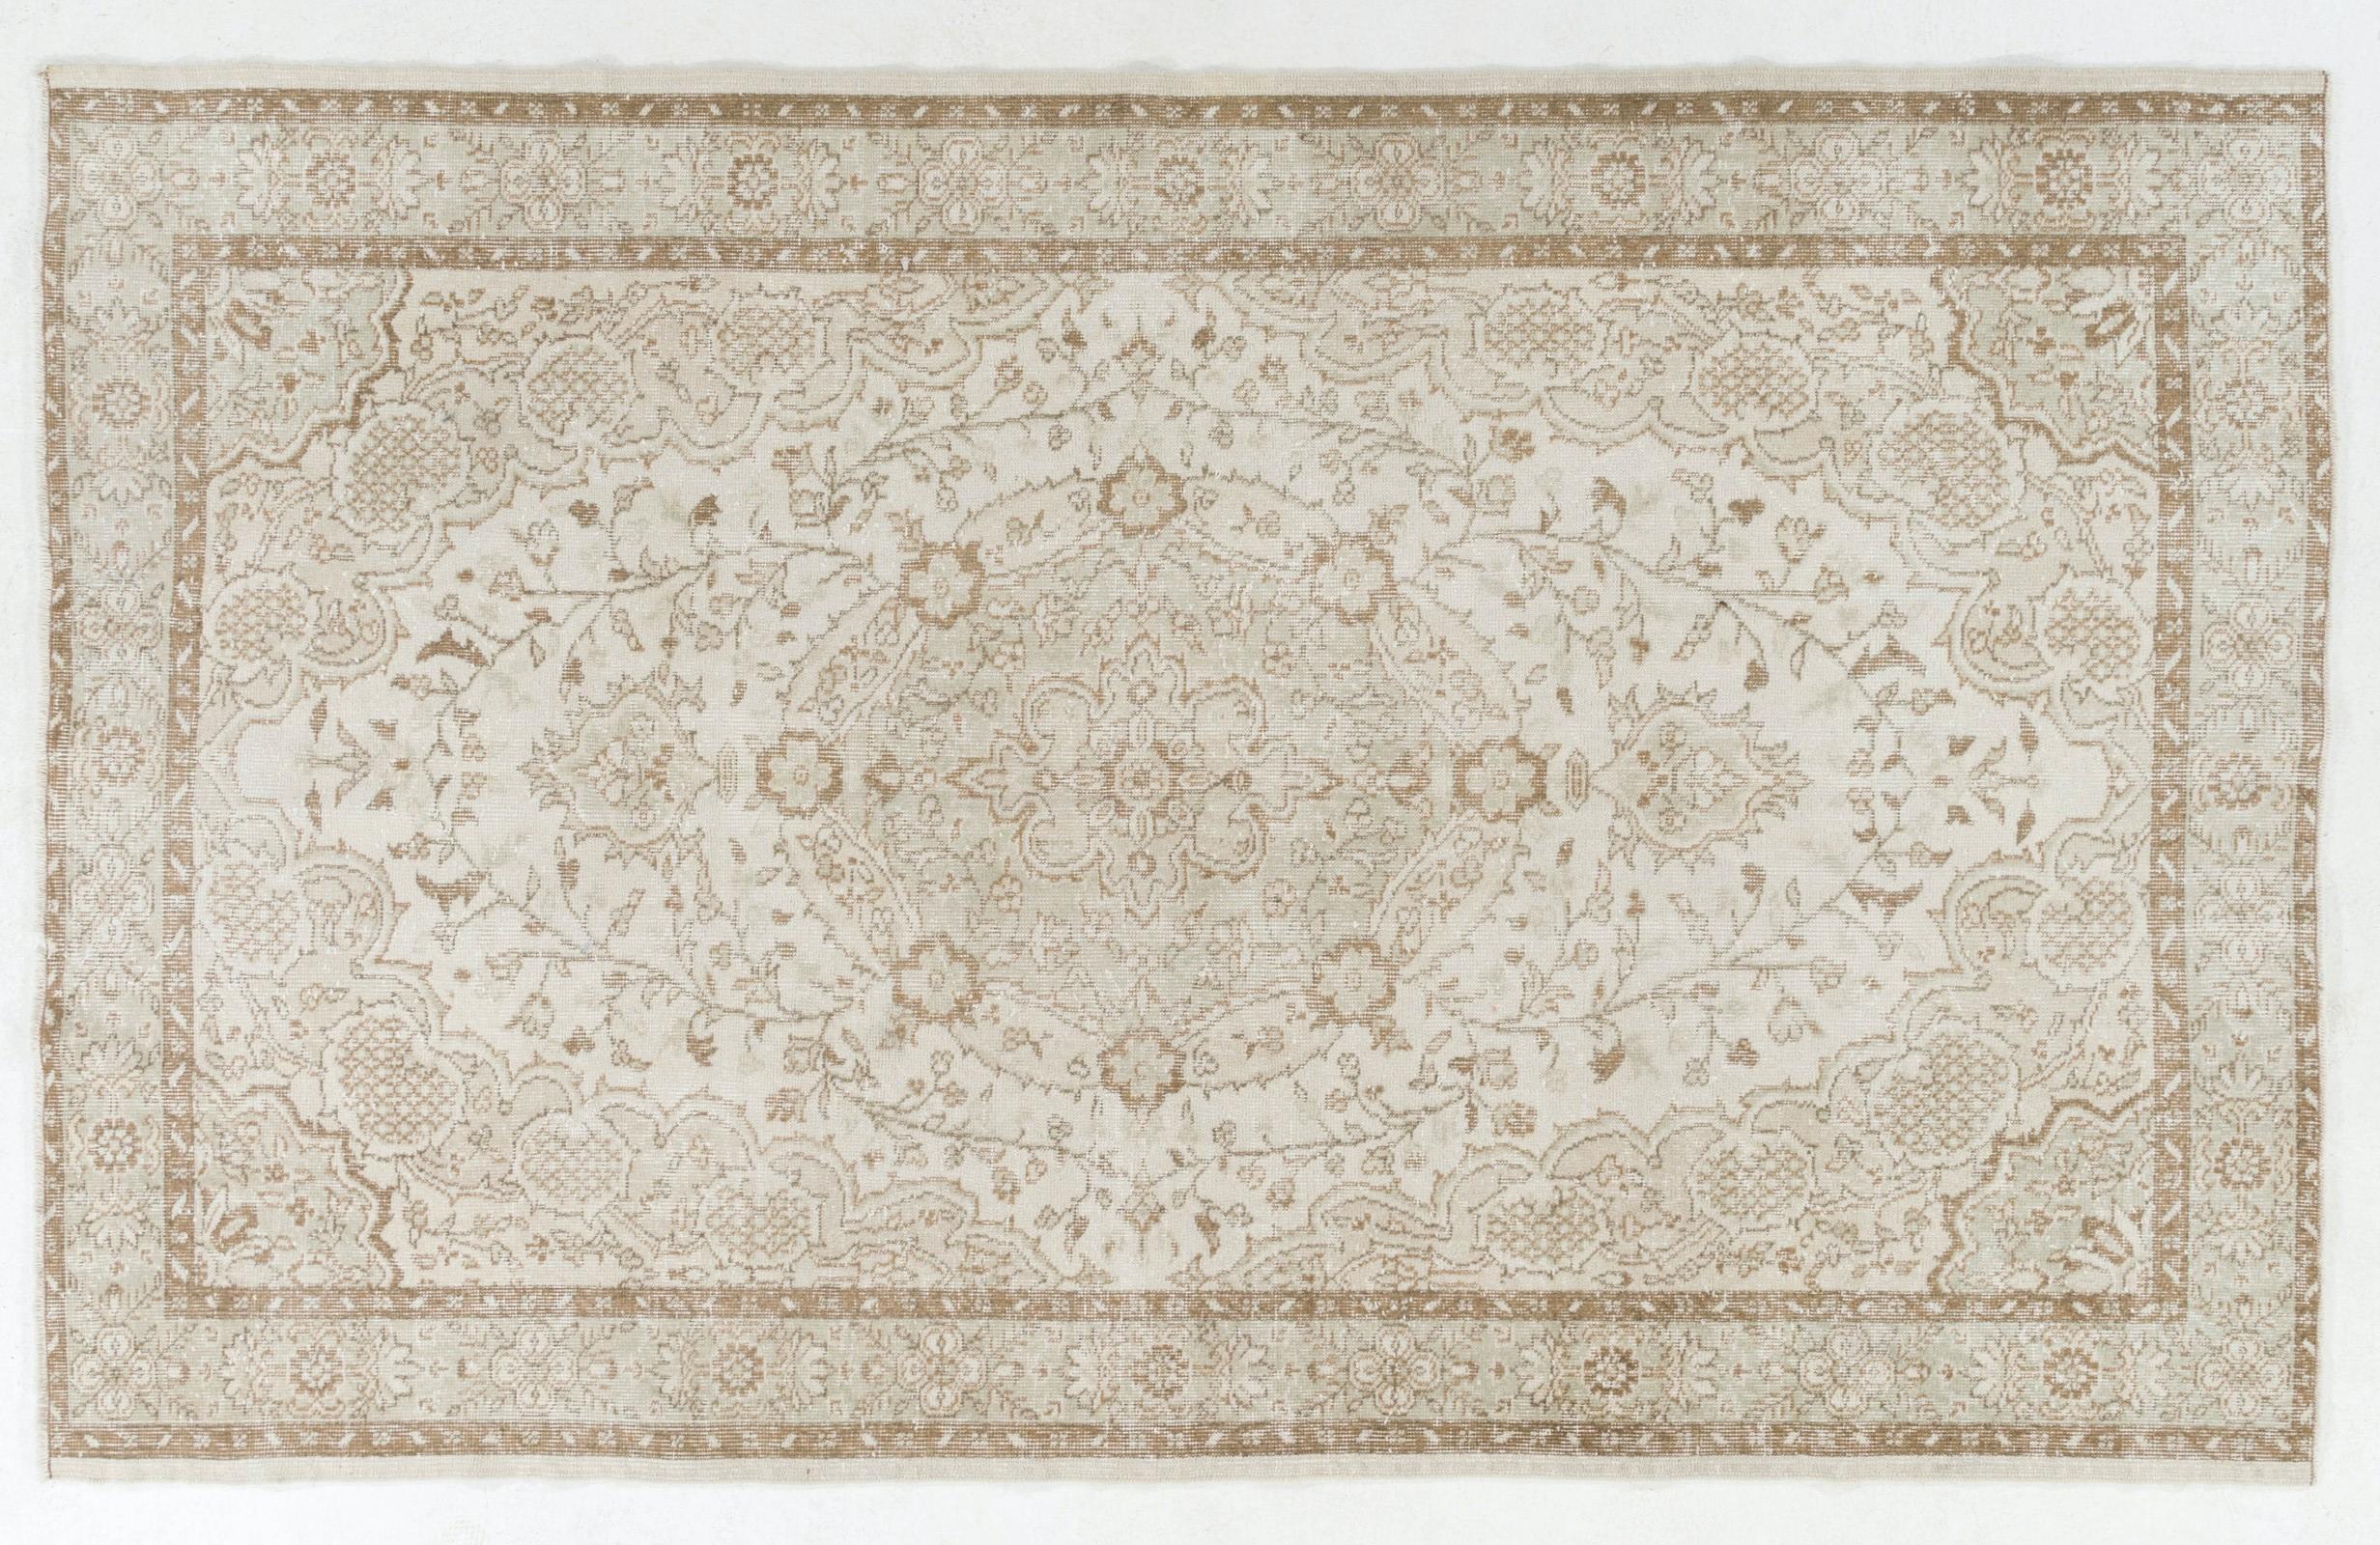 Cotton 6.2x9.7 Ft Vintage Hand-Knotted Turkish Oushak Wool Area Rug in Neutral Colors For Sale